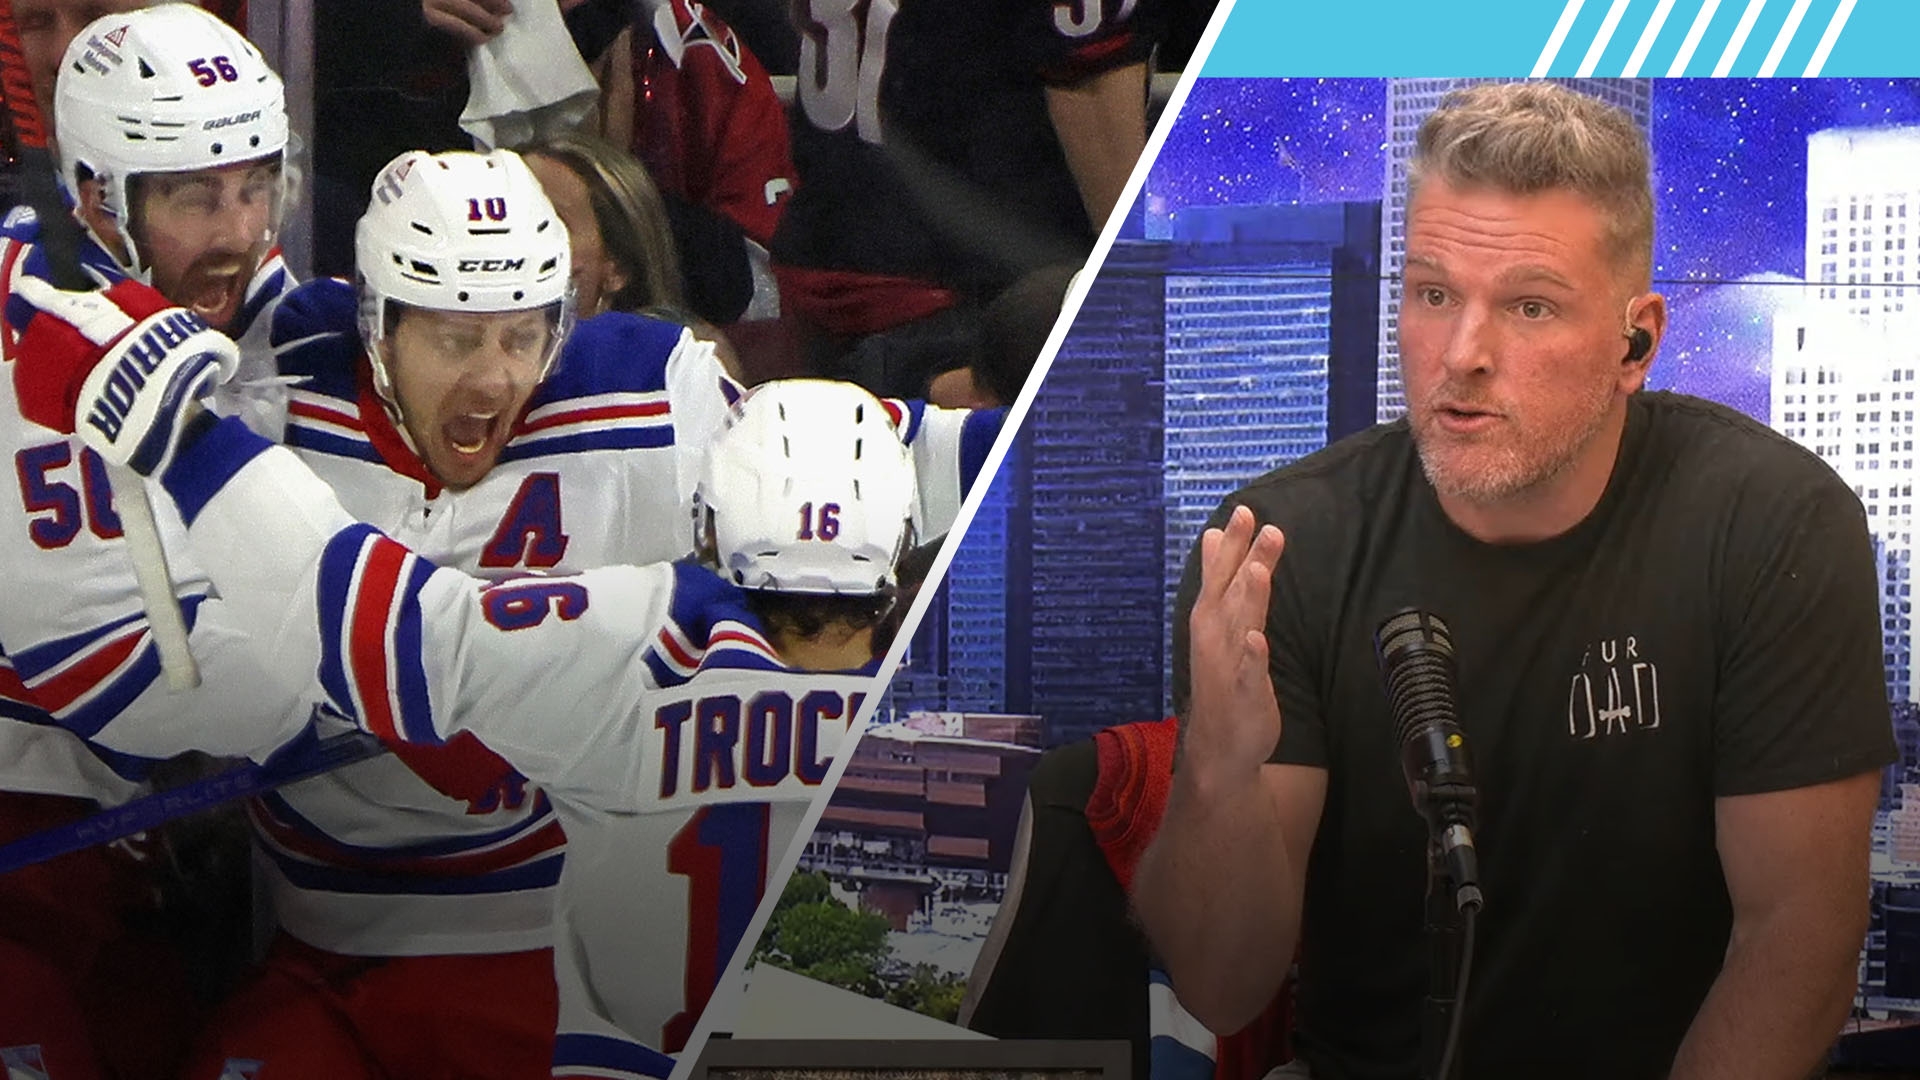 McAfee has high praise for Rangers after going up 3-0 on Hurricanes